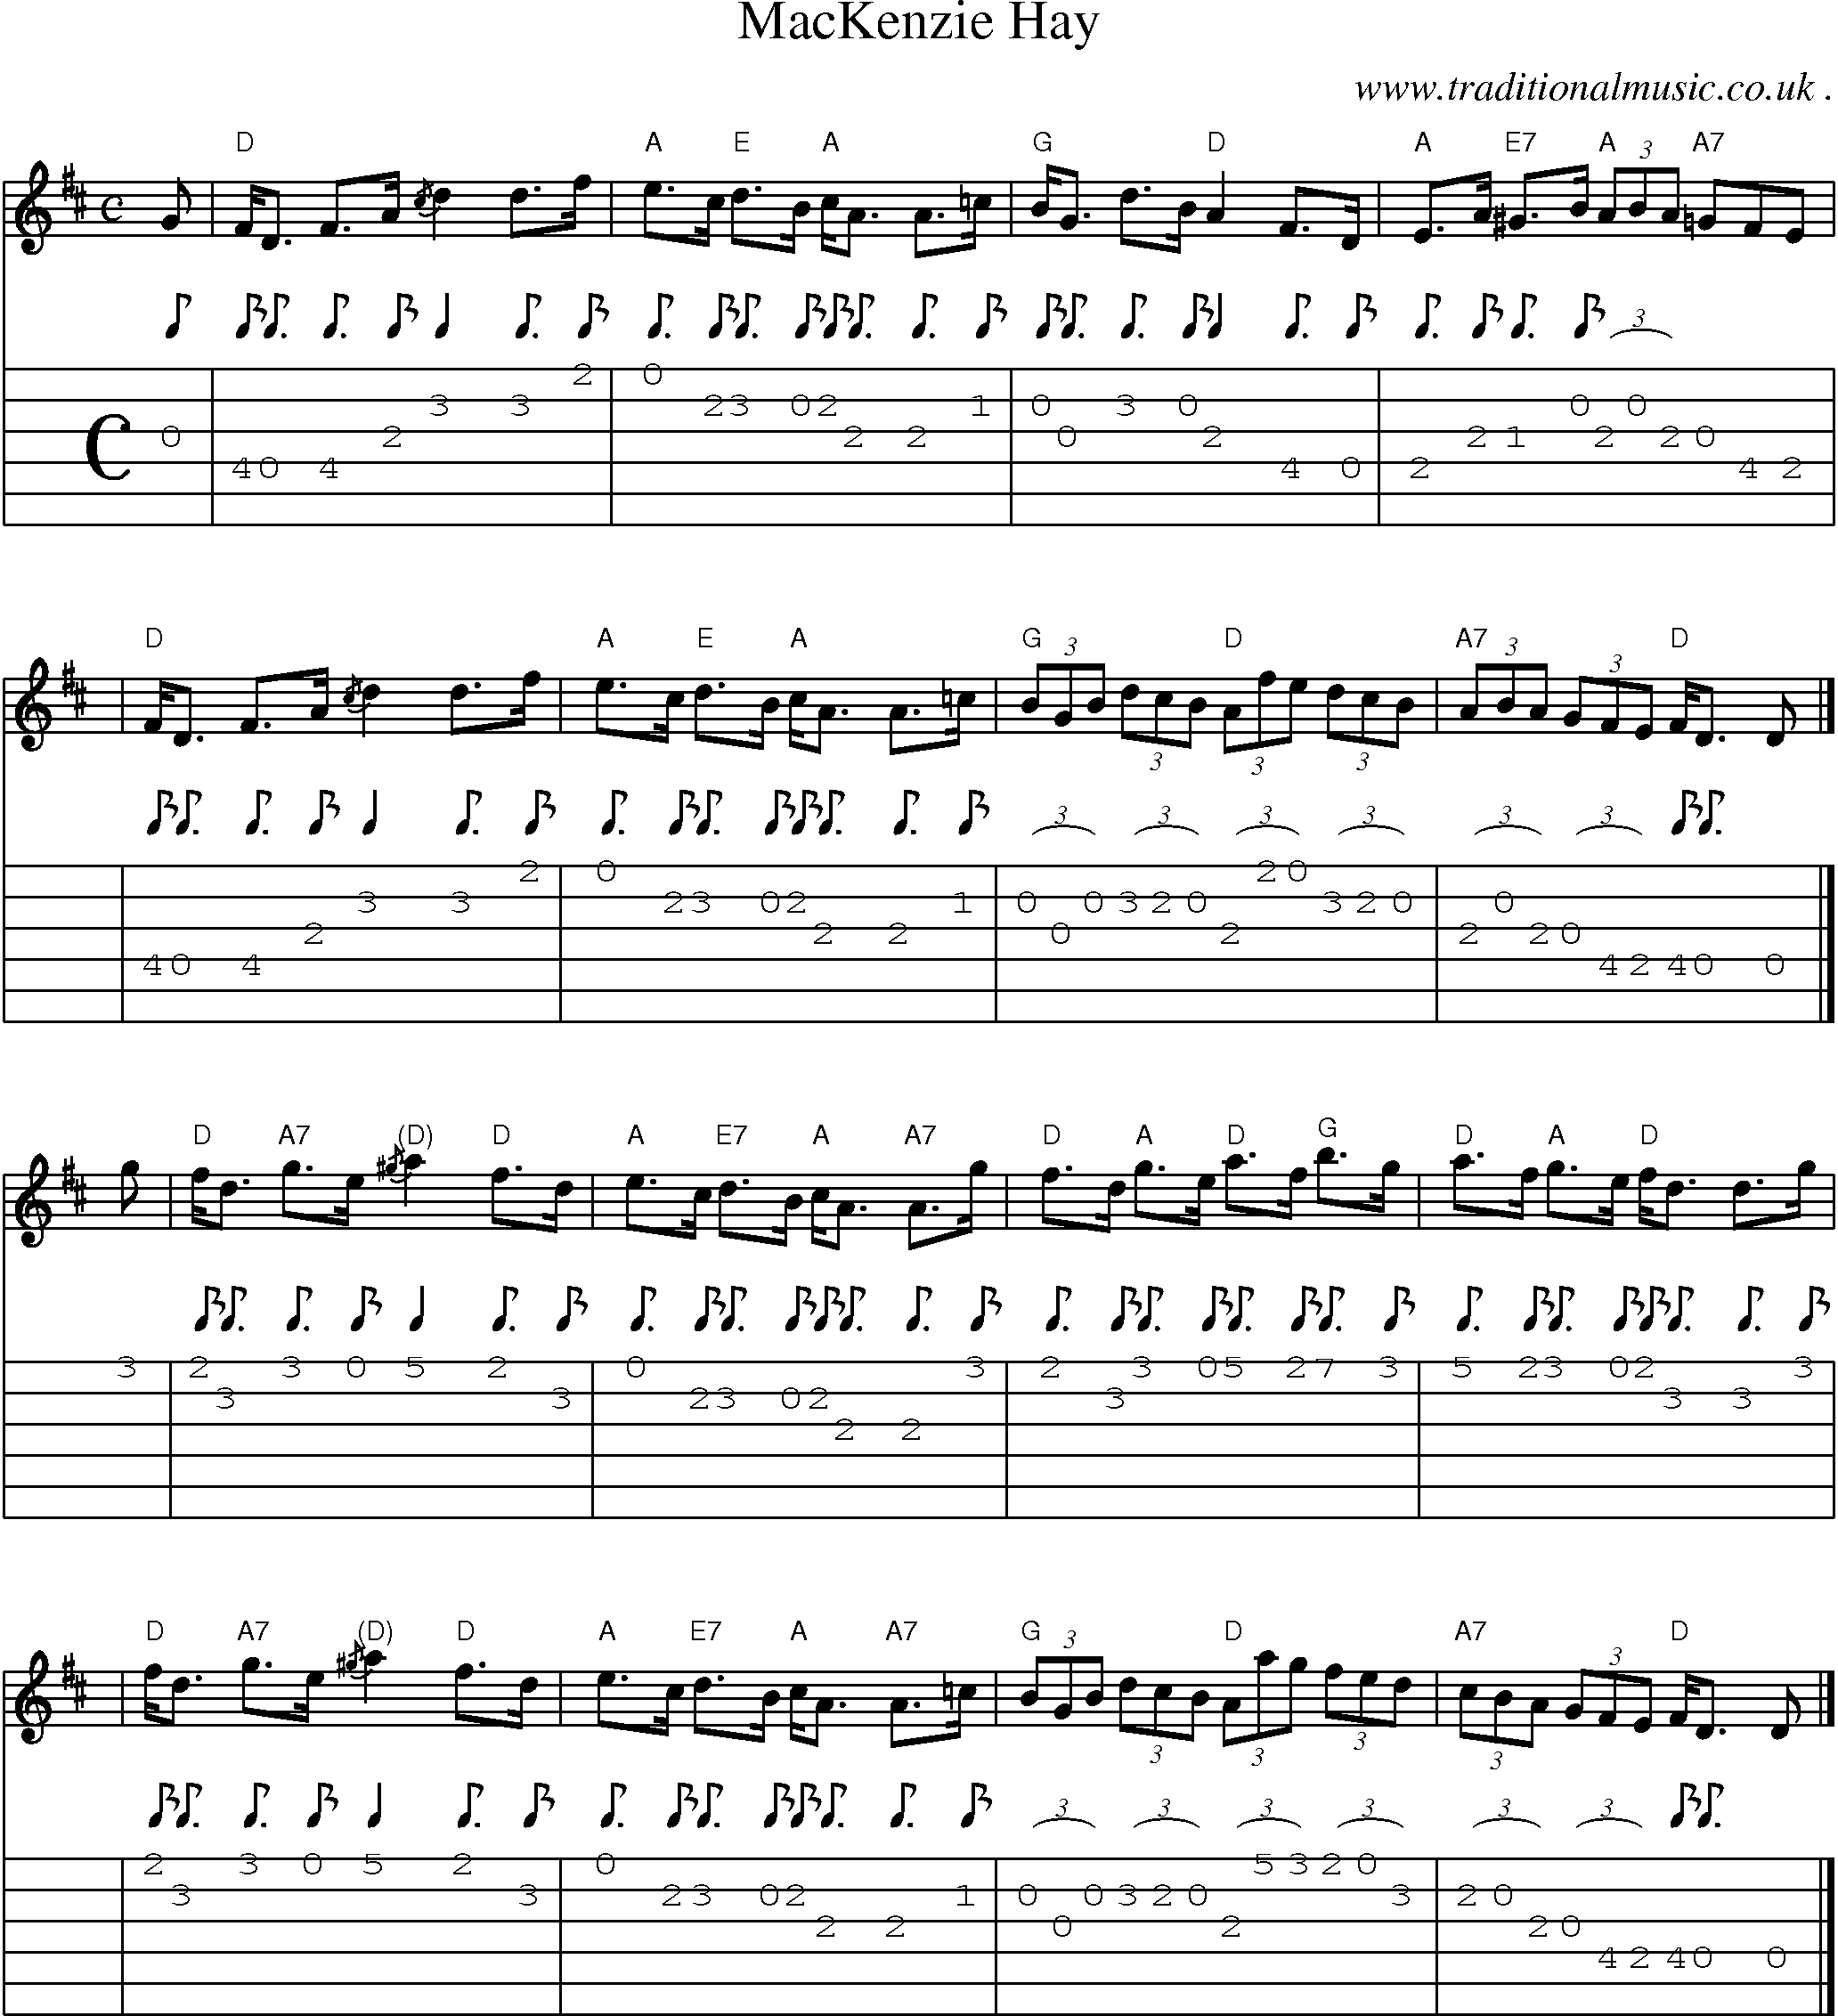 Sheet-music  score, Chords and Guitar Tabs for Mackenzie Hay